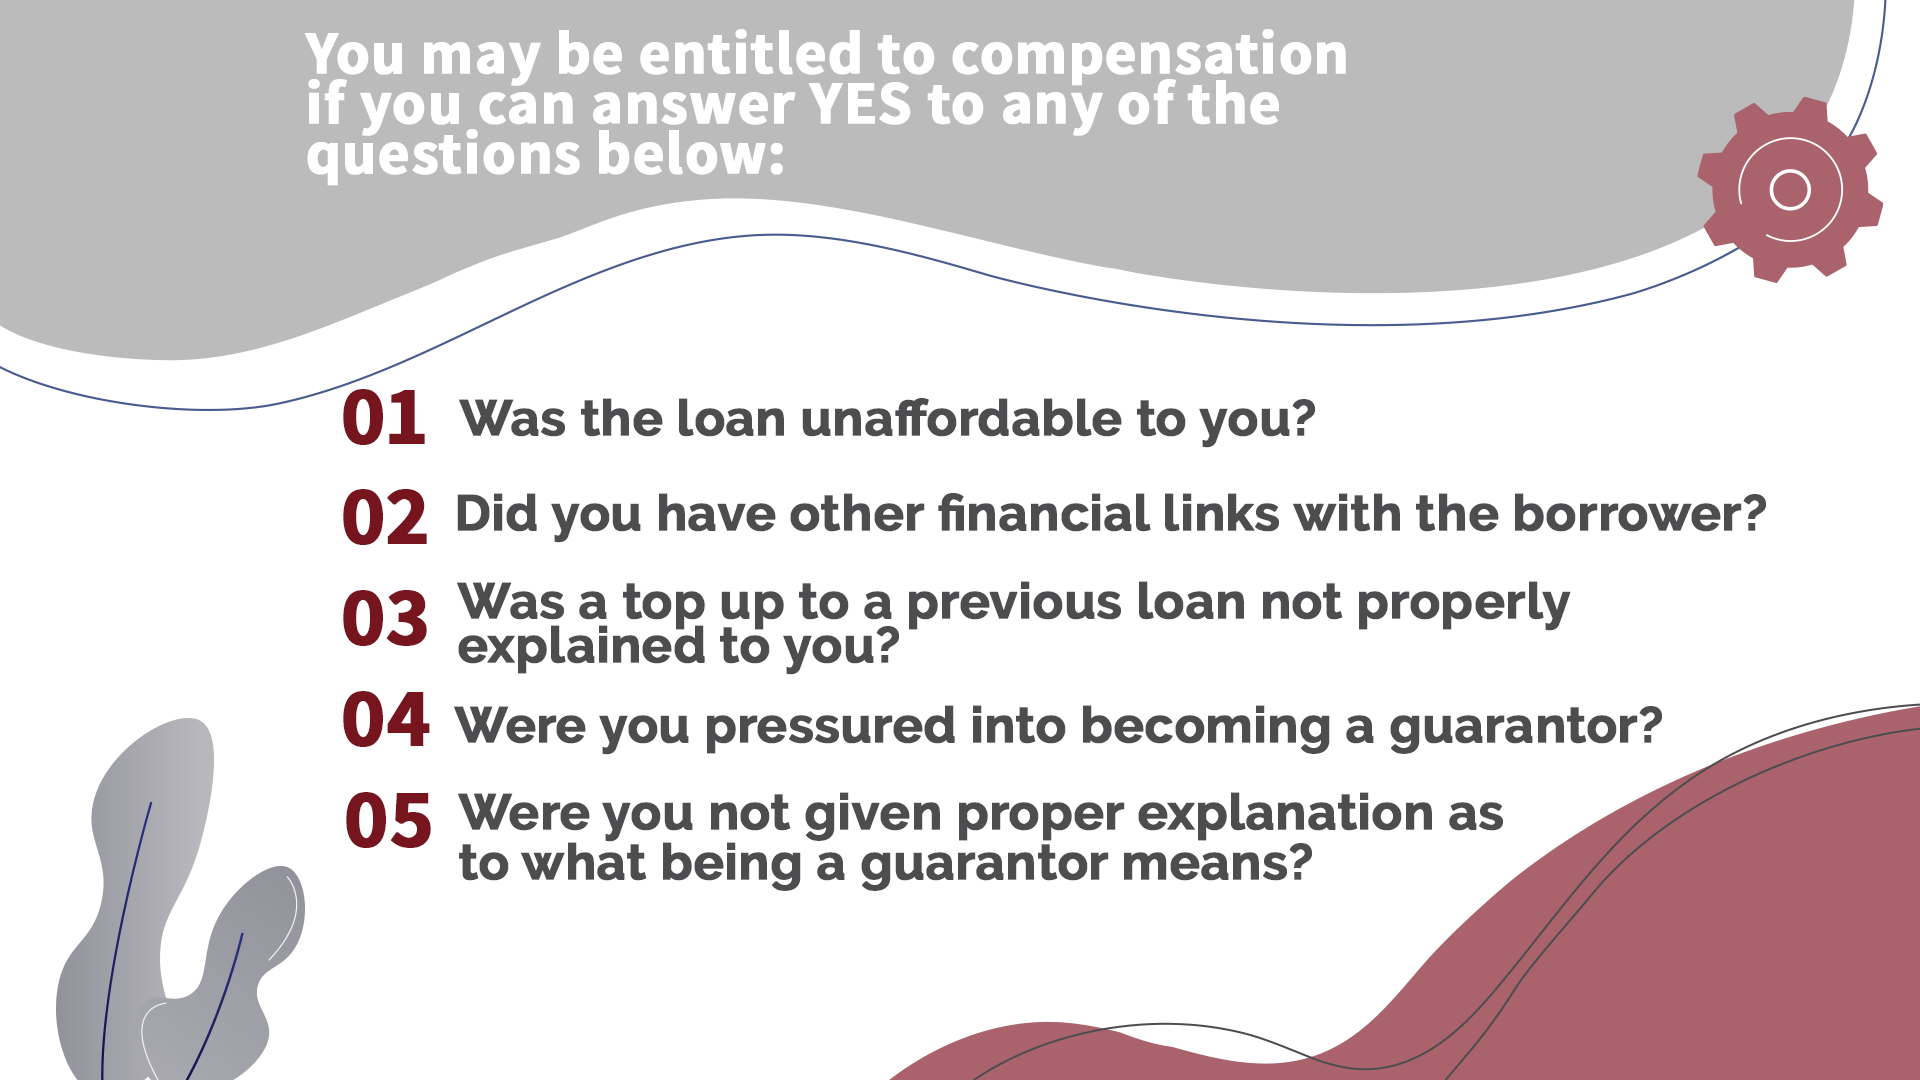 You may be entitled to compensation if you can answer yes to any of the questions below